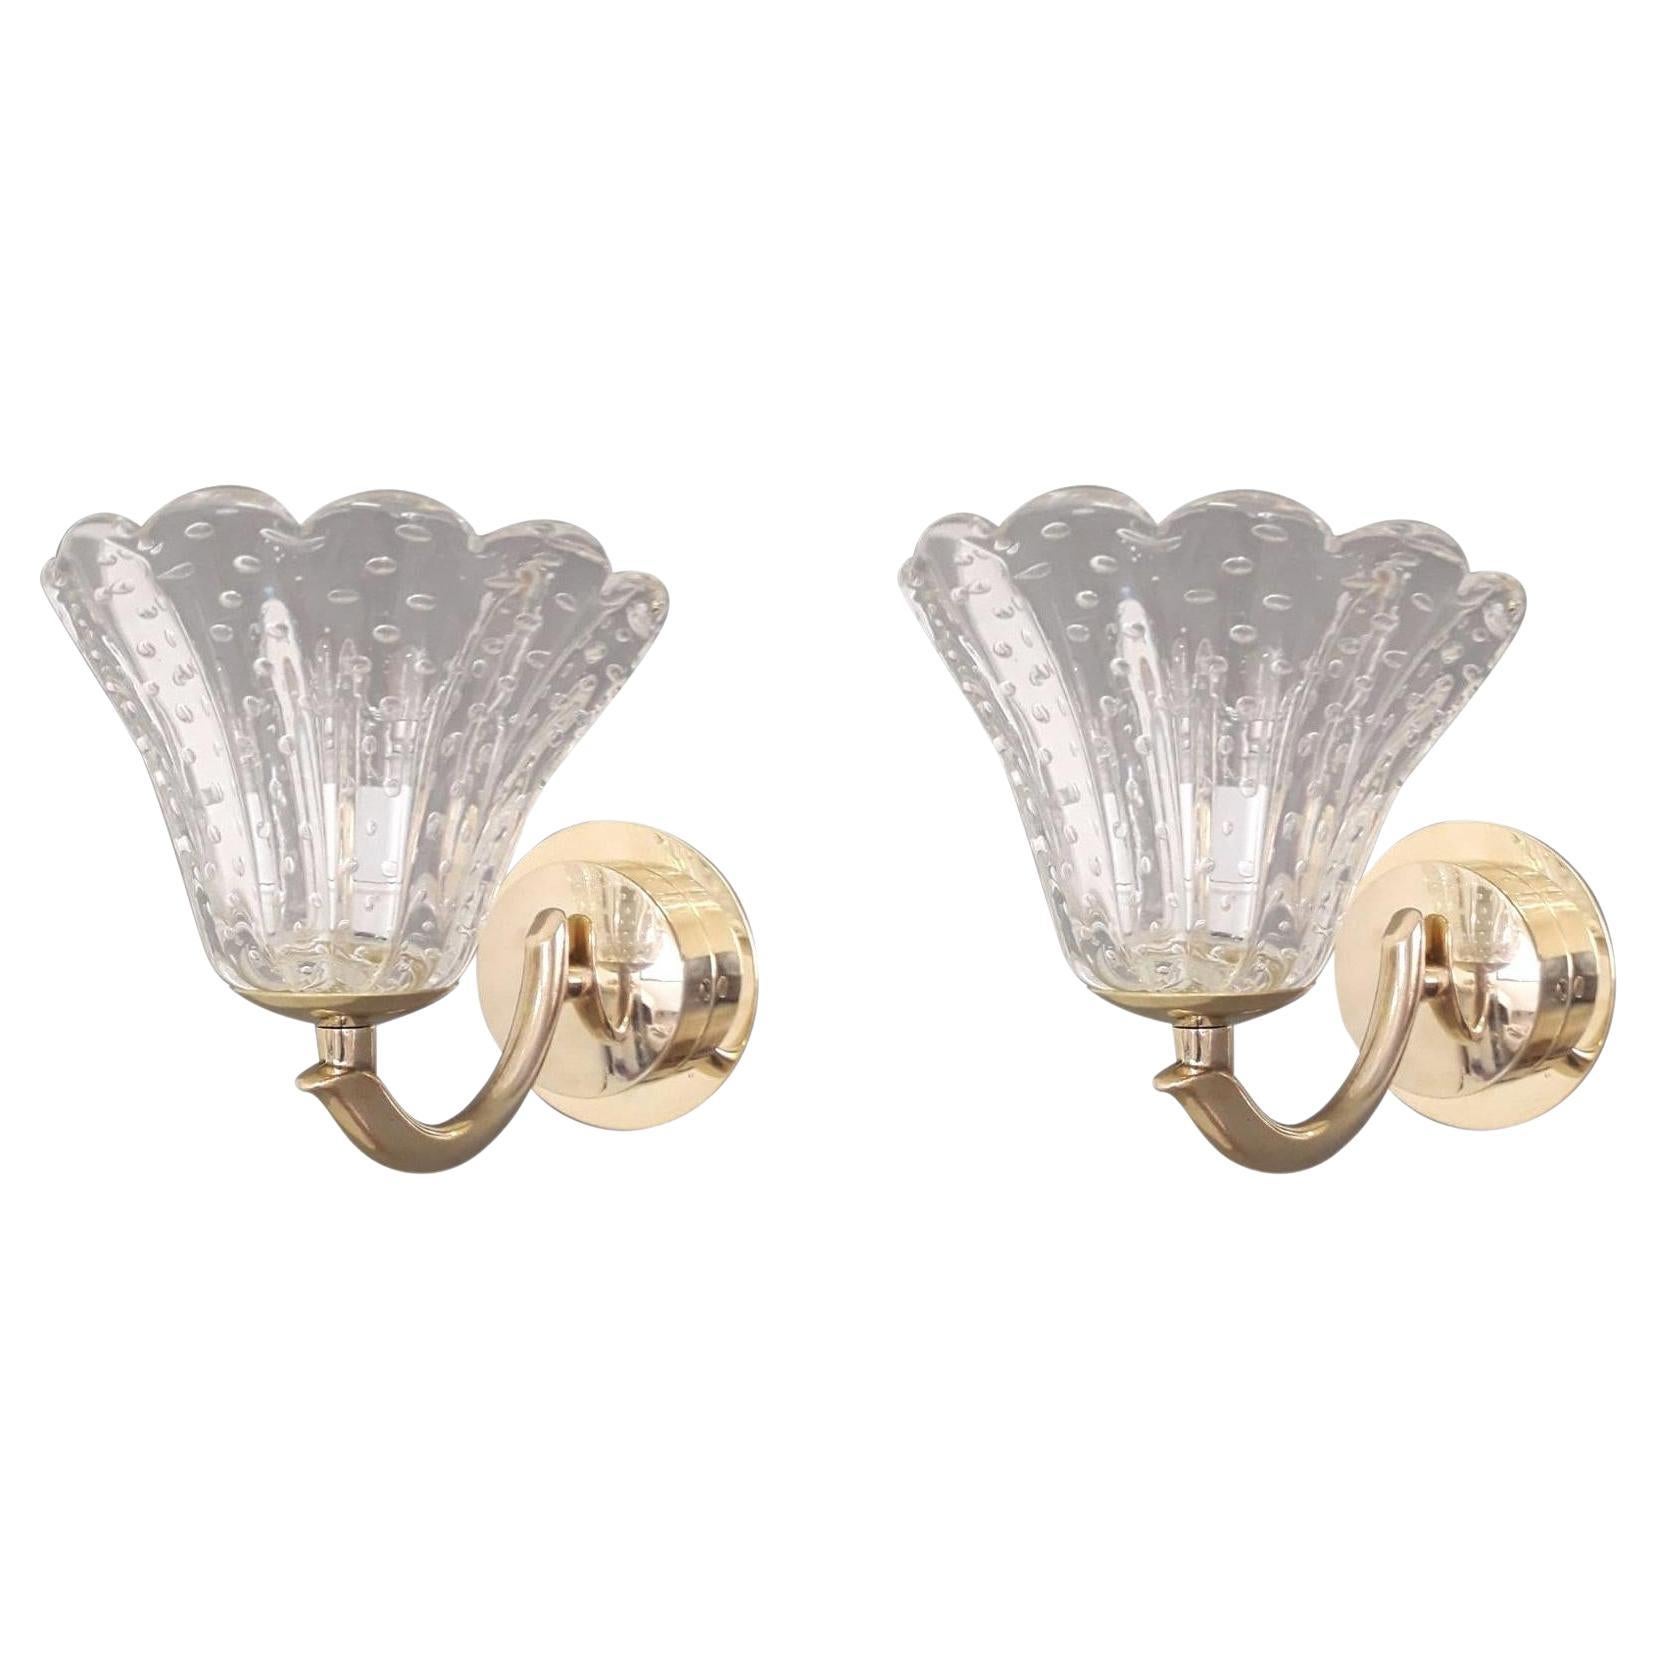 Pair of Bollicine Cups Sconces by Barovier e Toso, 3 Pairs Available